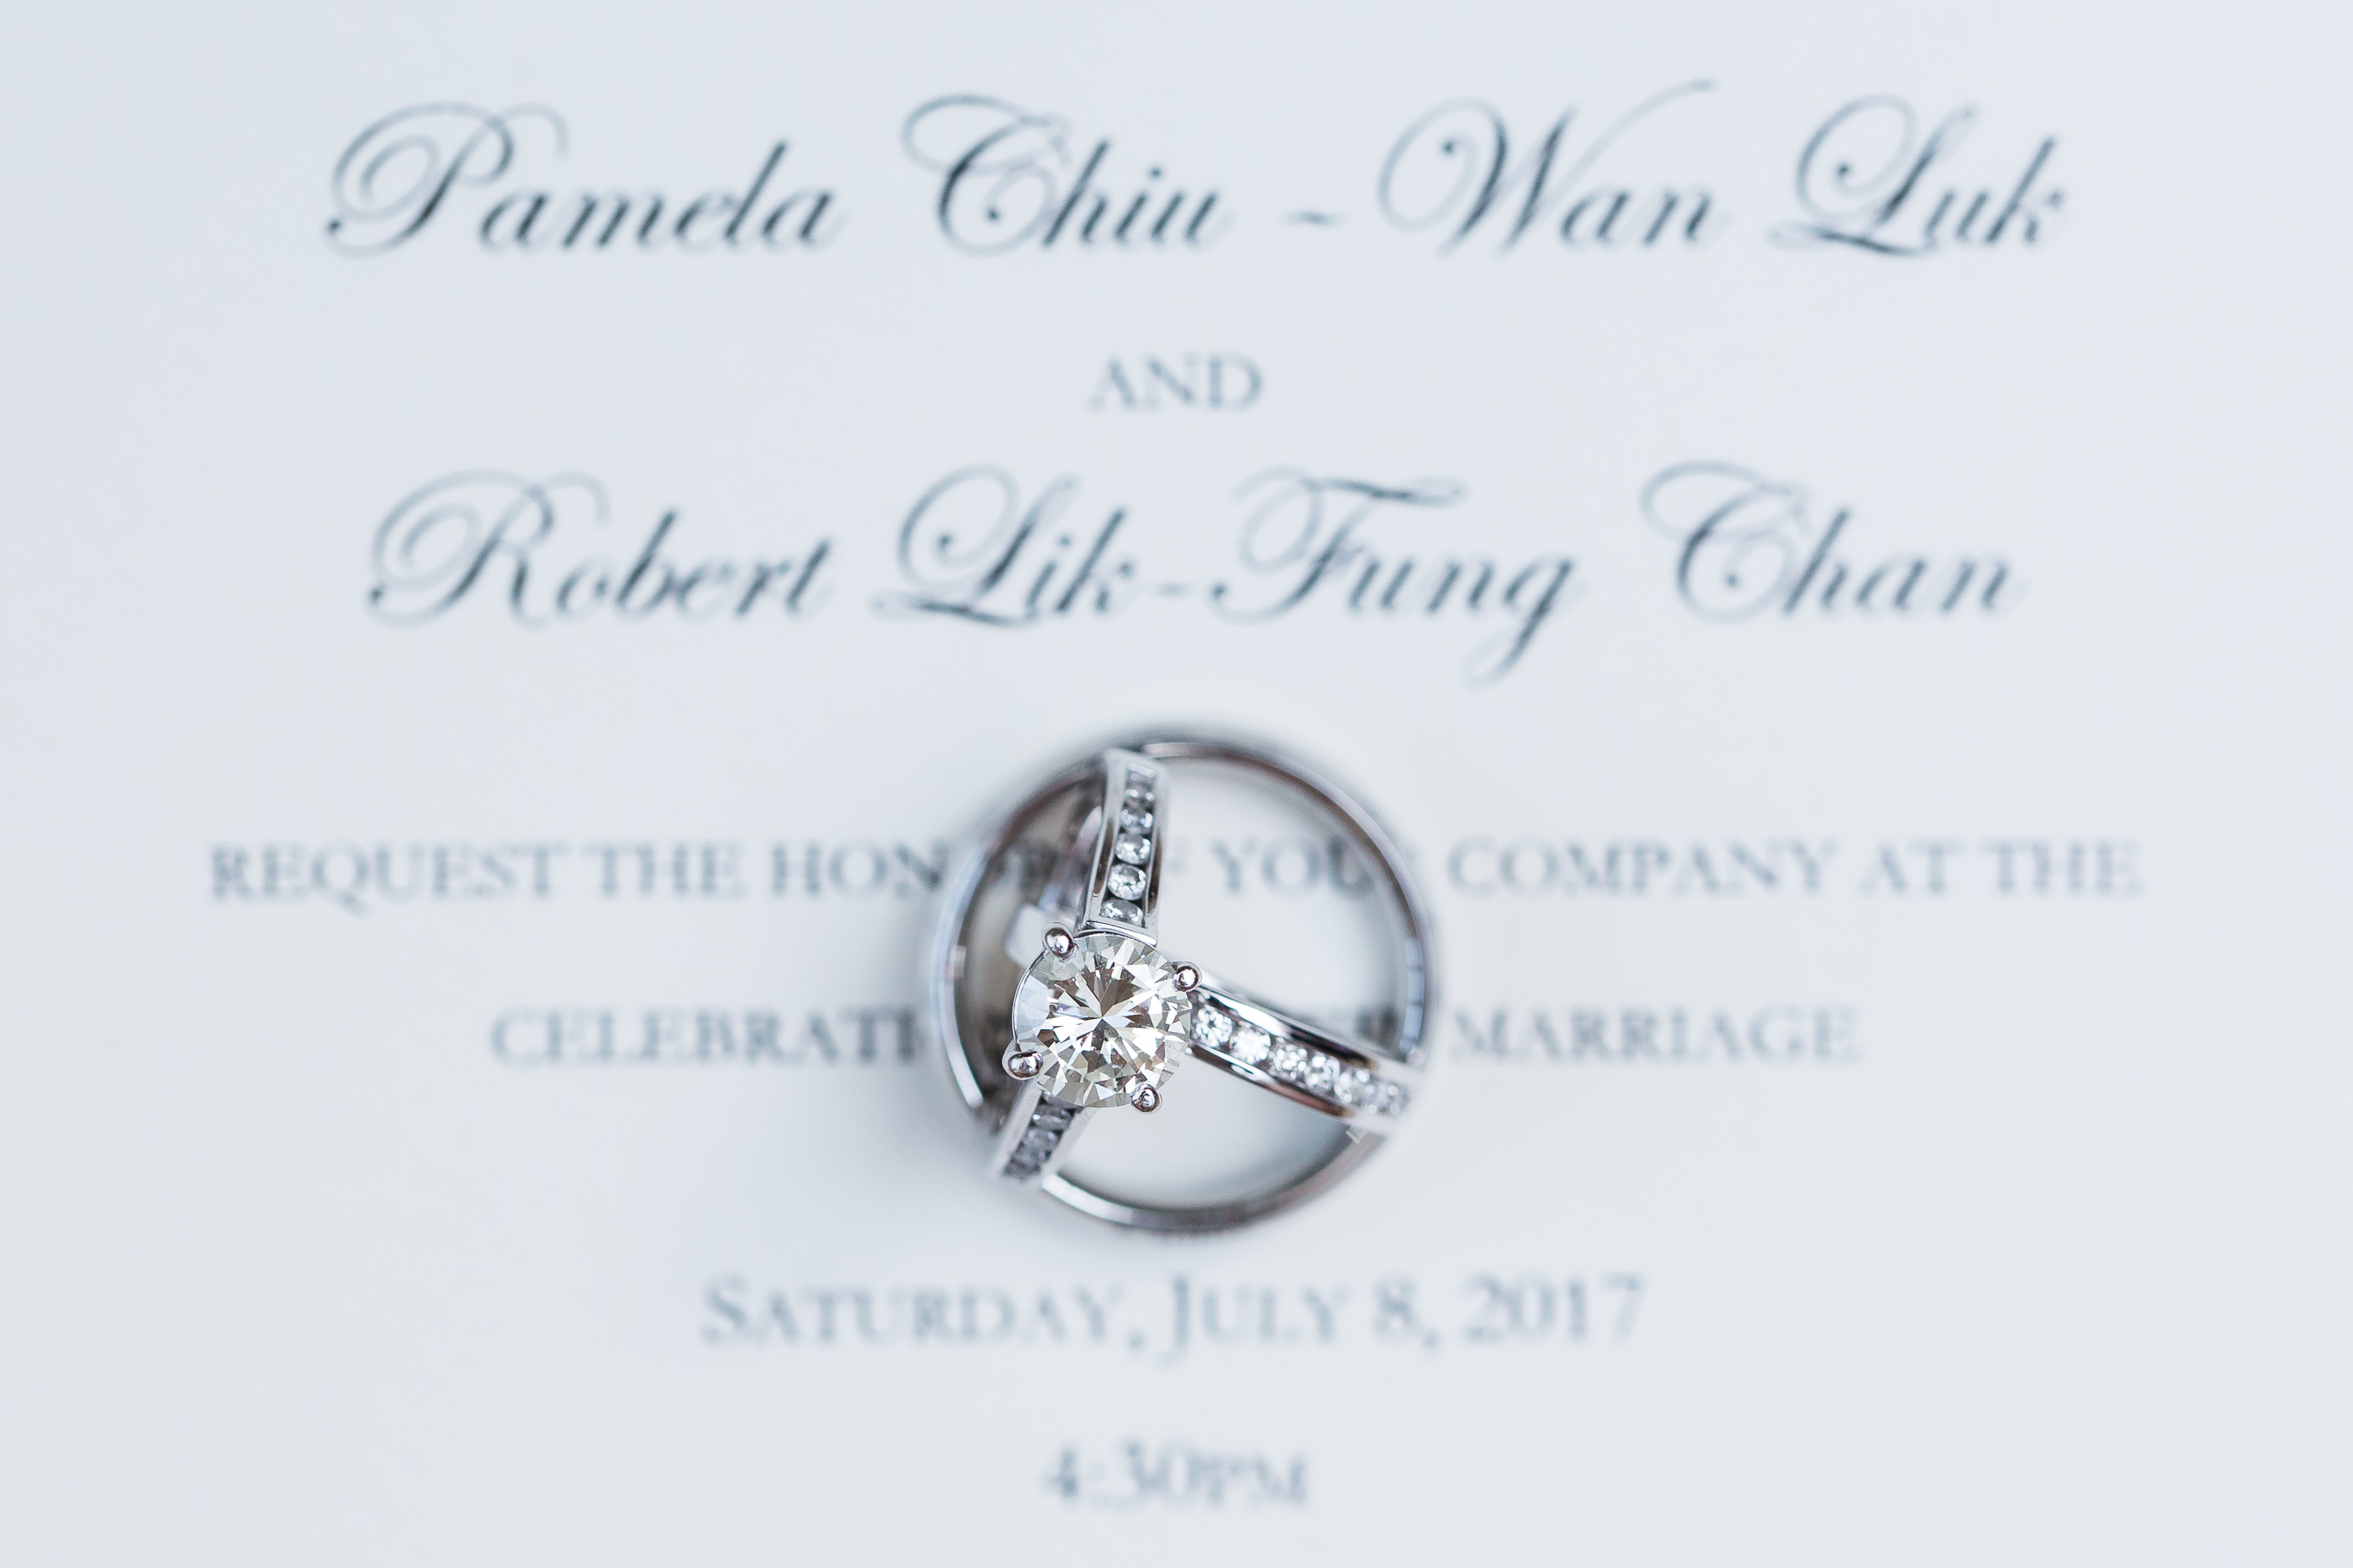 Bride and groom rings photographed by Stefani Ciotti at a Pacific Palms Resort Wedding